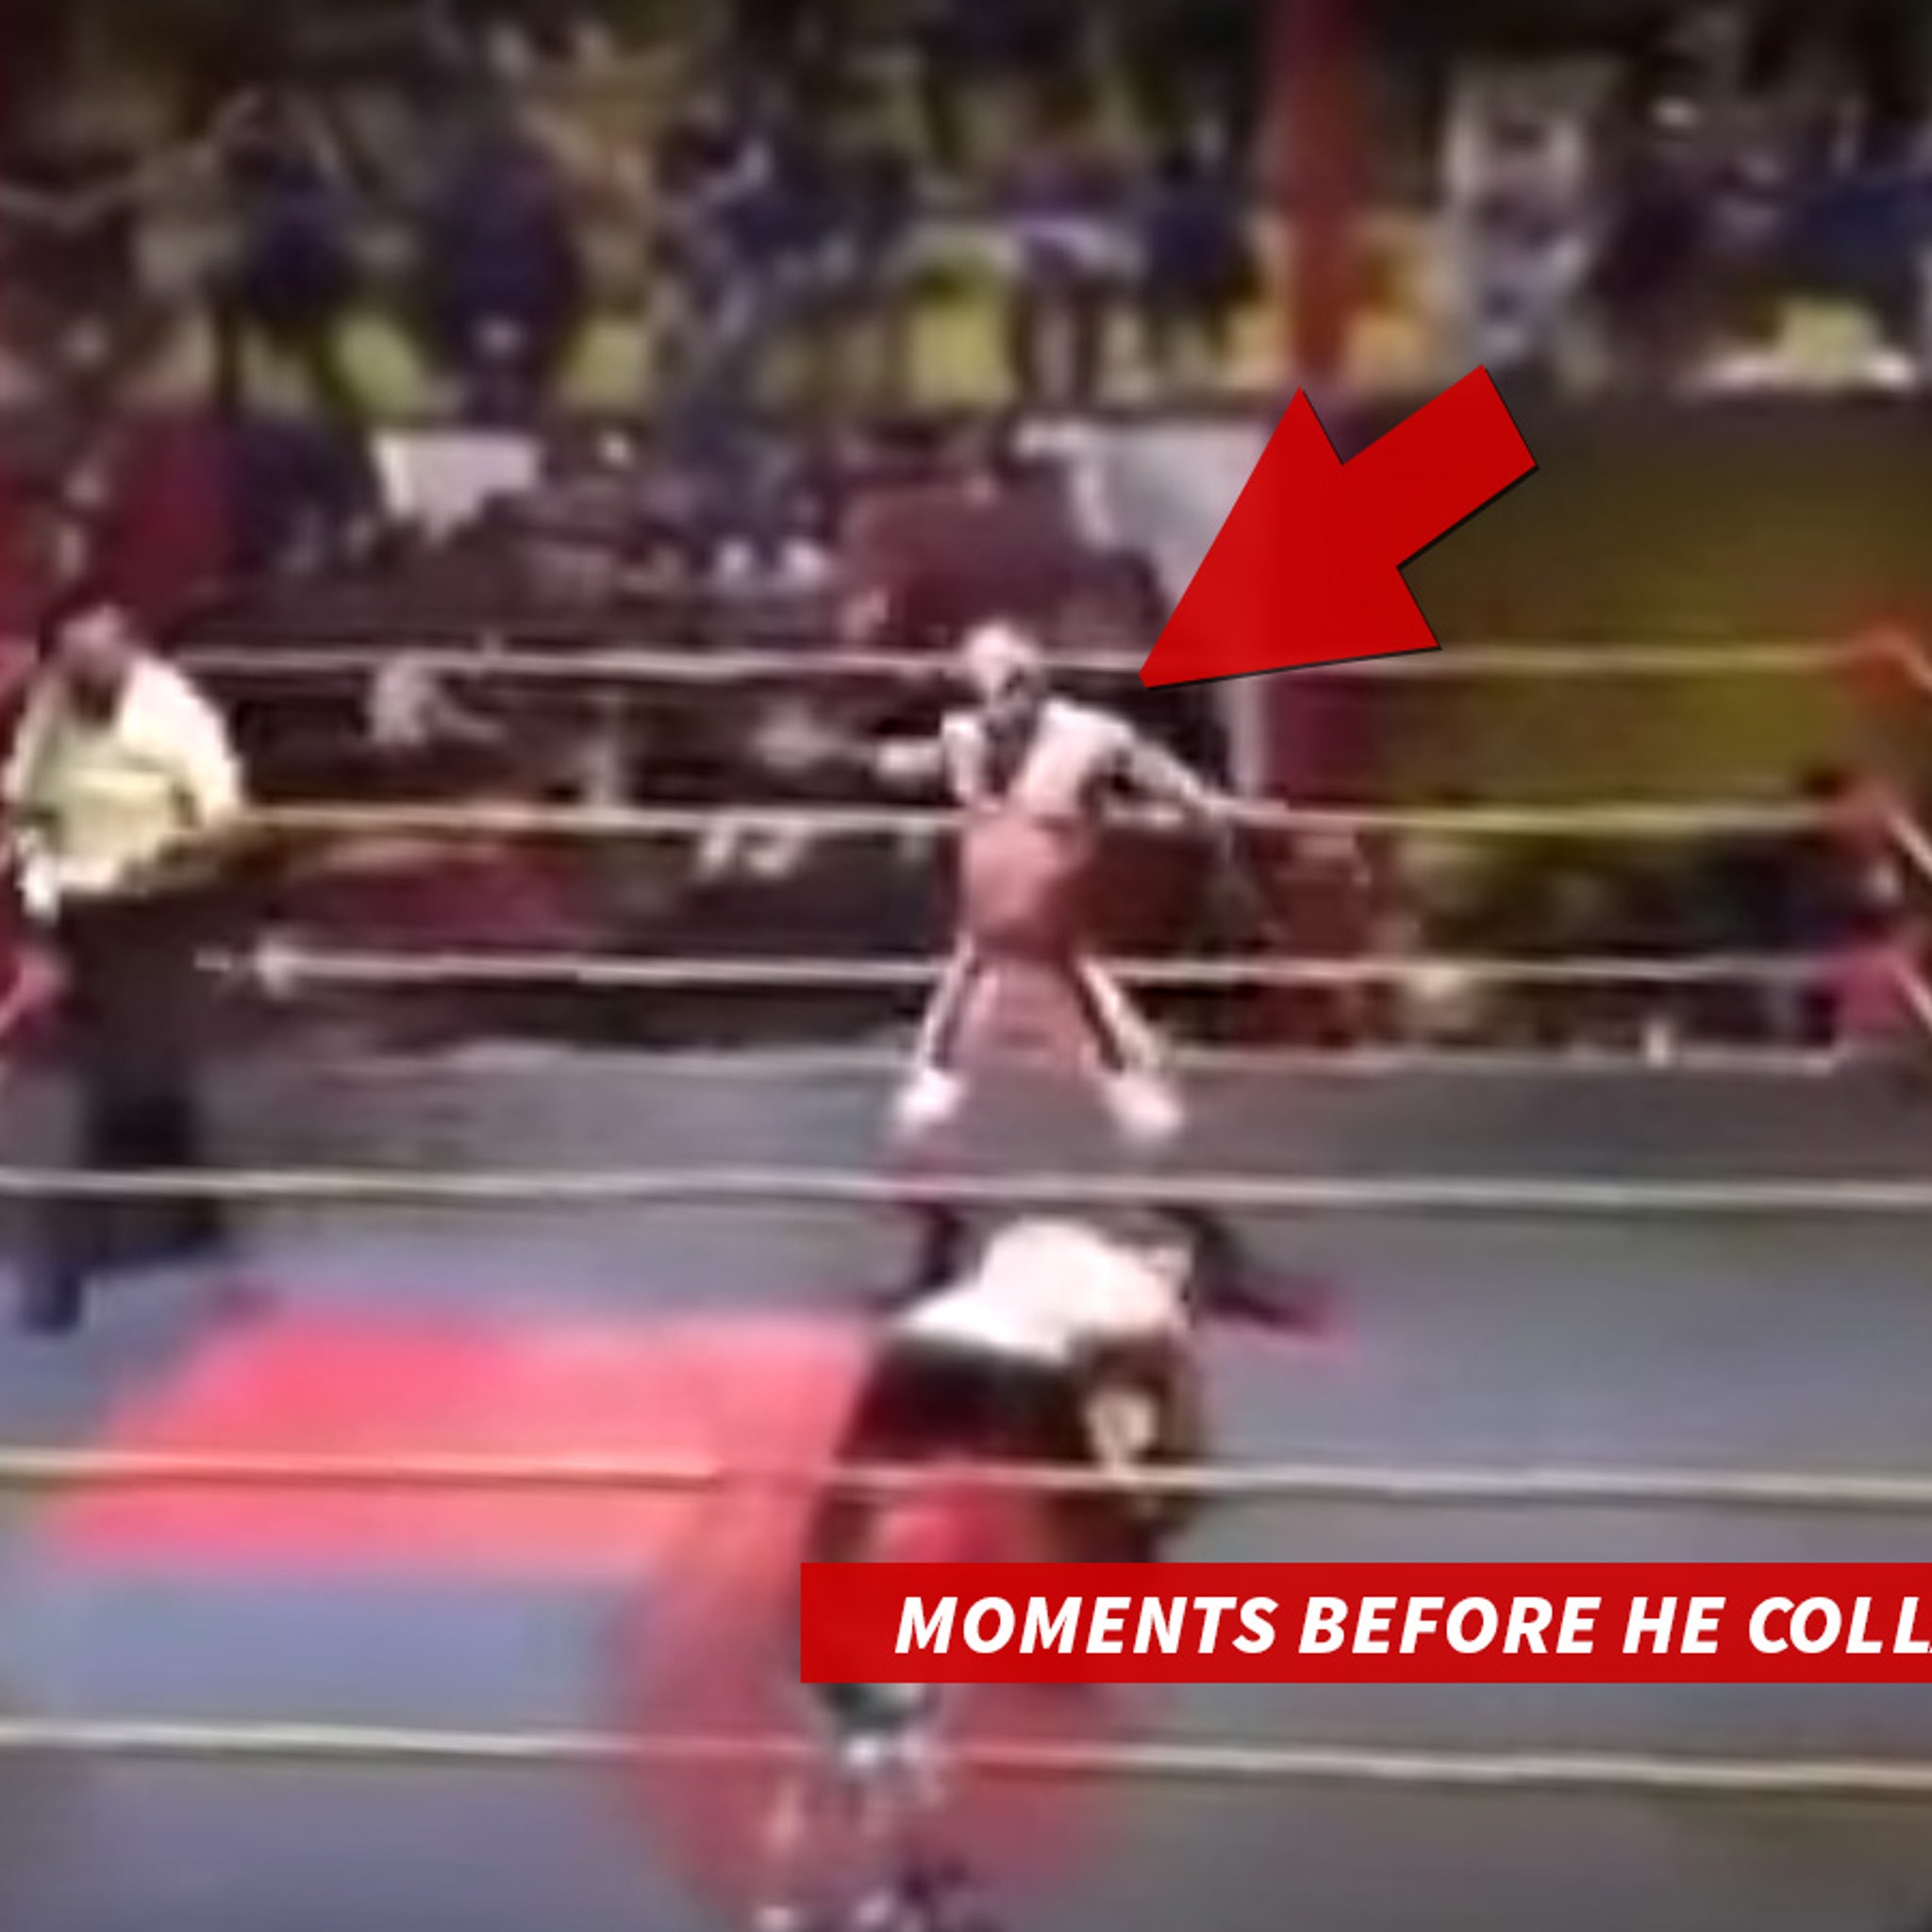 Luchador Wrestler Principe Aereo Dead At 26 After Collapsing In Ring